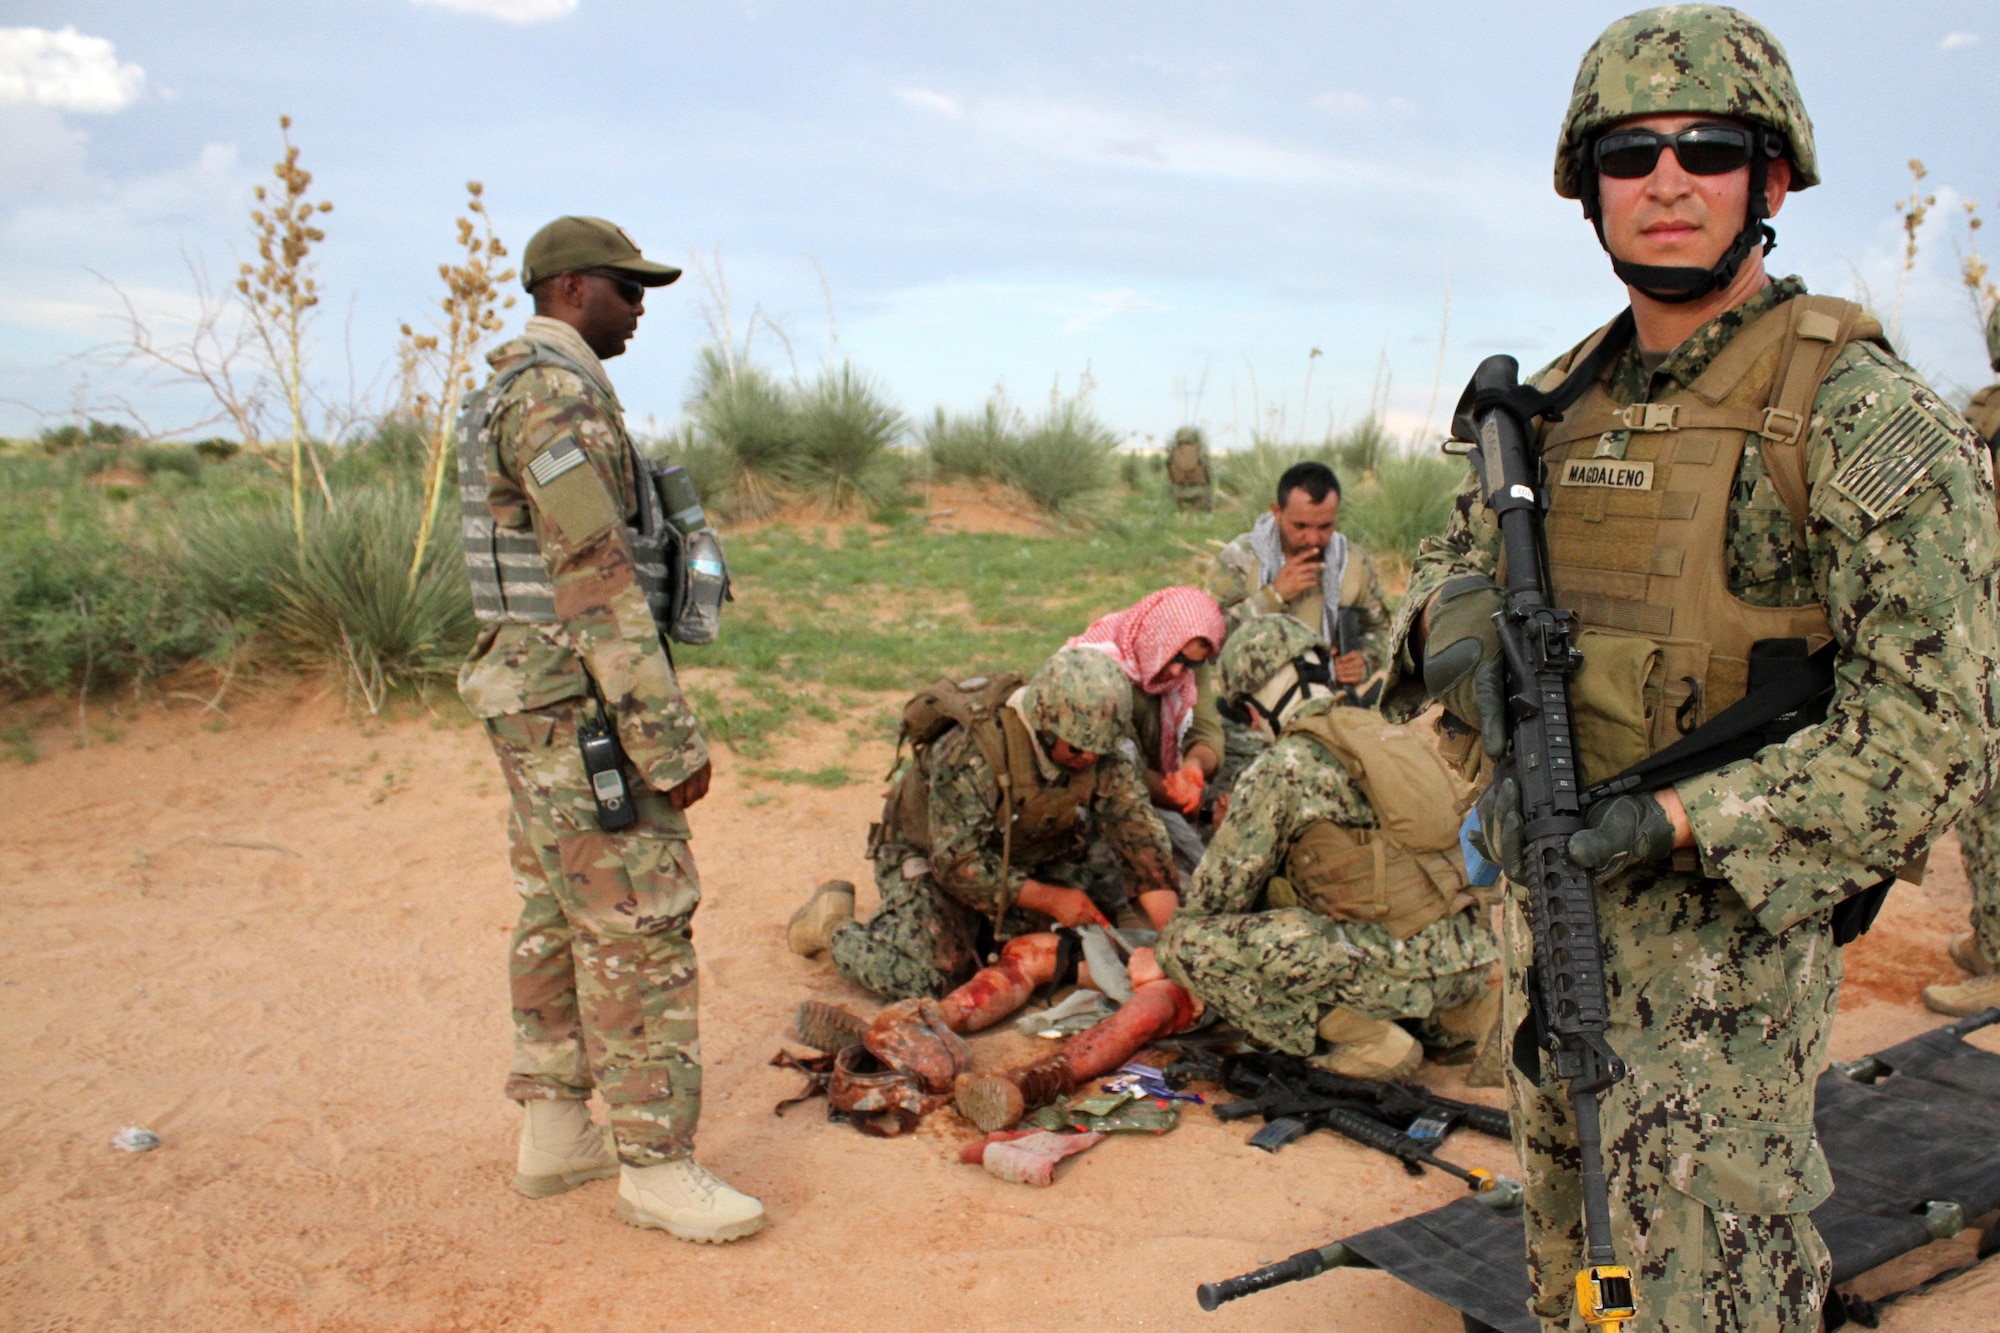 A U.S. Navy masters-at-arms treat and comfort a simulated improvised explosive device victim while other team members keep watch for other threats.